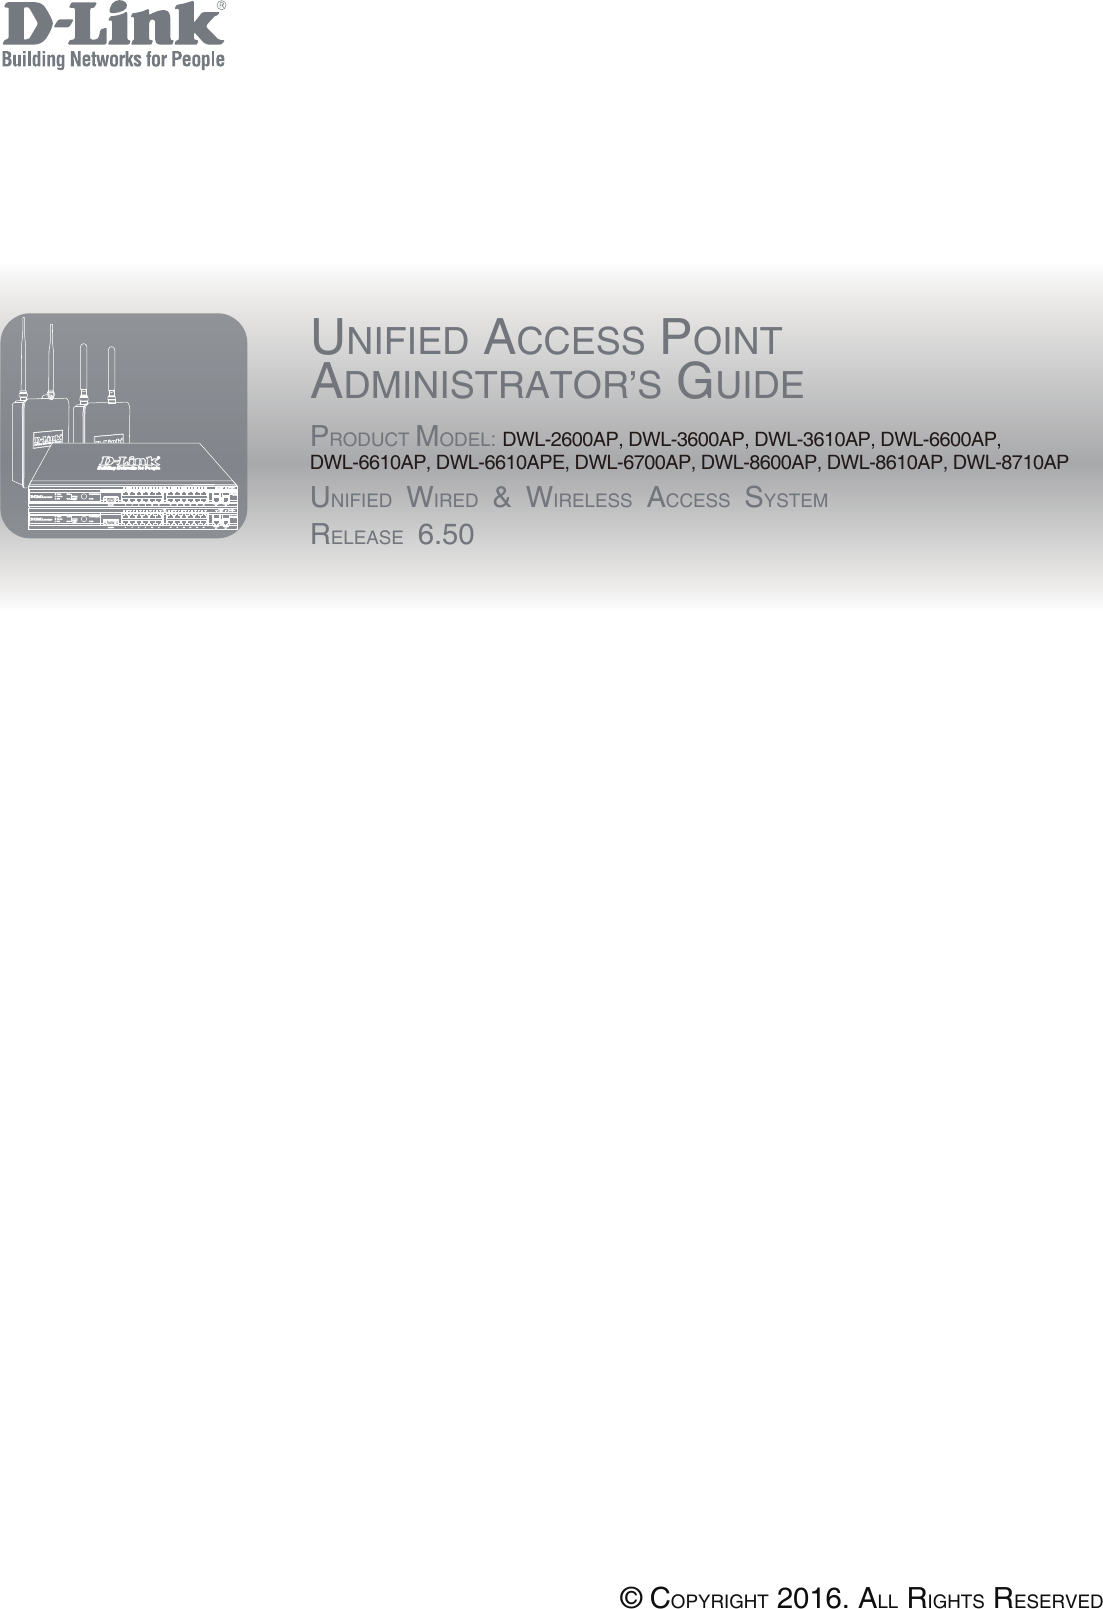 UNIFIED ACCESS POINTADMINISTRATOR’S GUIDEPRODUCT MODEL: DWL-2600AP, DWL-3600AP, DWL-3610AP, DWL-6600AP, DWL-6610AP, DWL-6610APE, DWL-6700AP, DWL-8600AP, DWL-8610AP, DWL-8710APUNIFIED WIRED &amp; WIRELESS ACCESS SYSTEMRELEASE 6.50© COPYRIGHT 2016. ALL RIGHTS RESERVED